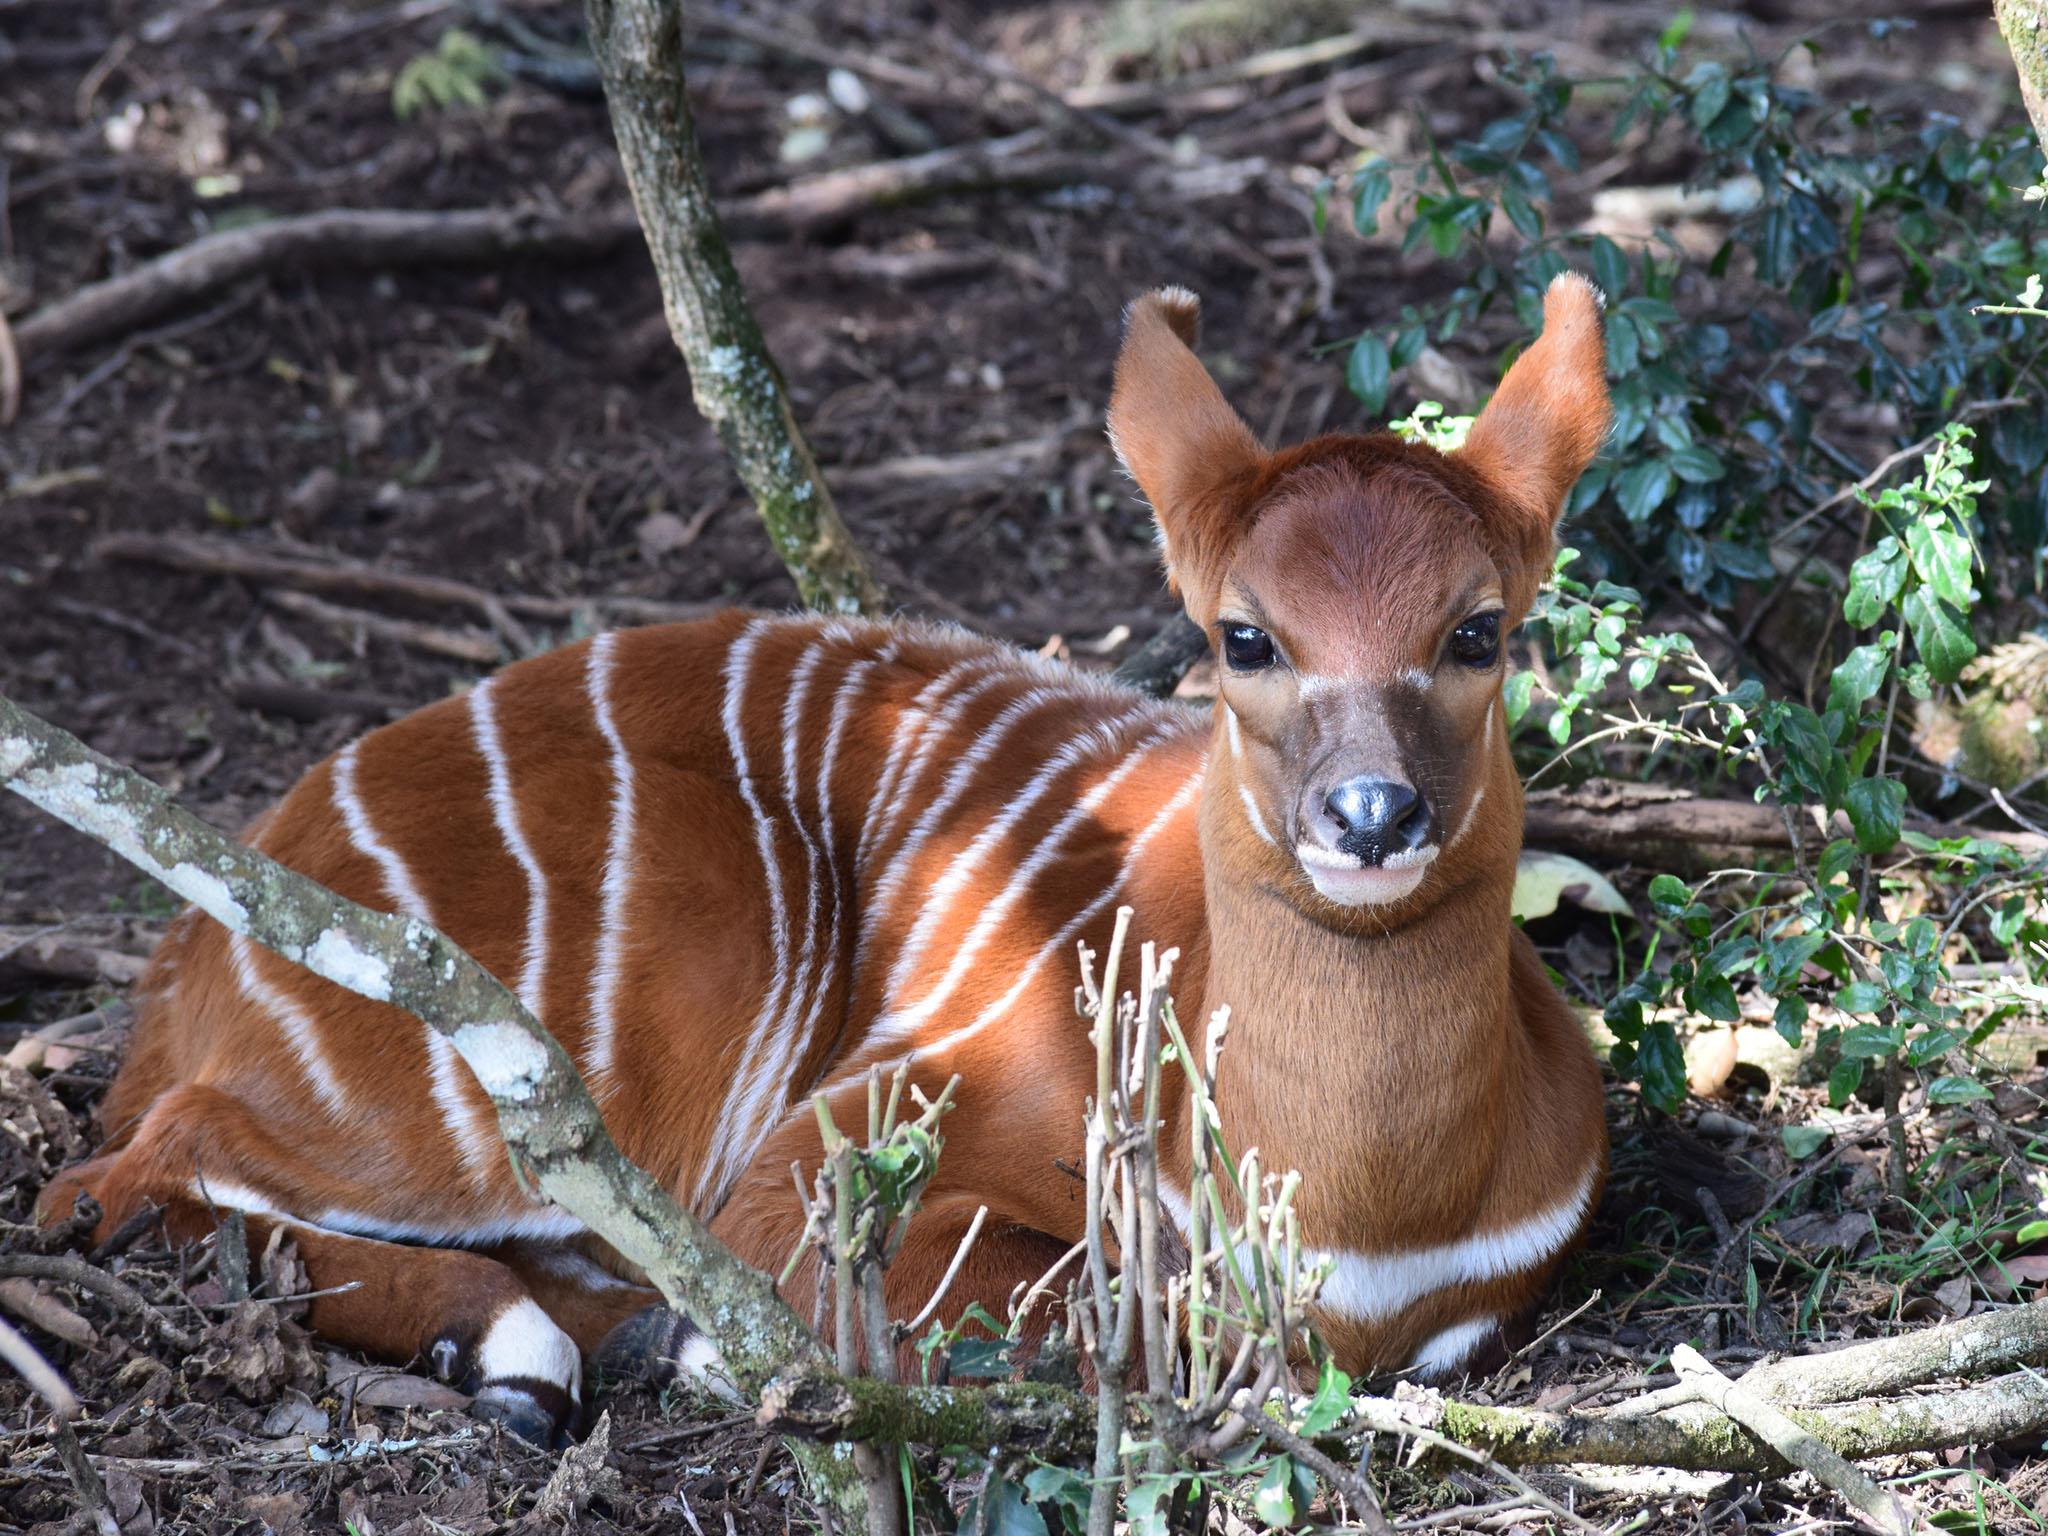 The newest member of the Mountain Bongo community at the Mount Kenya Wildlife Conservancy